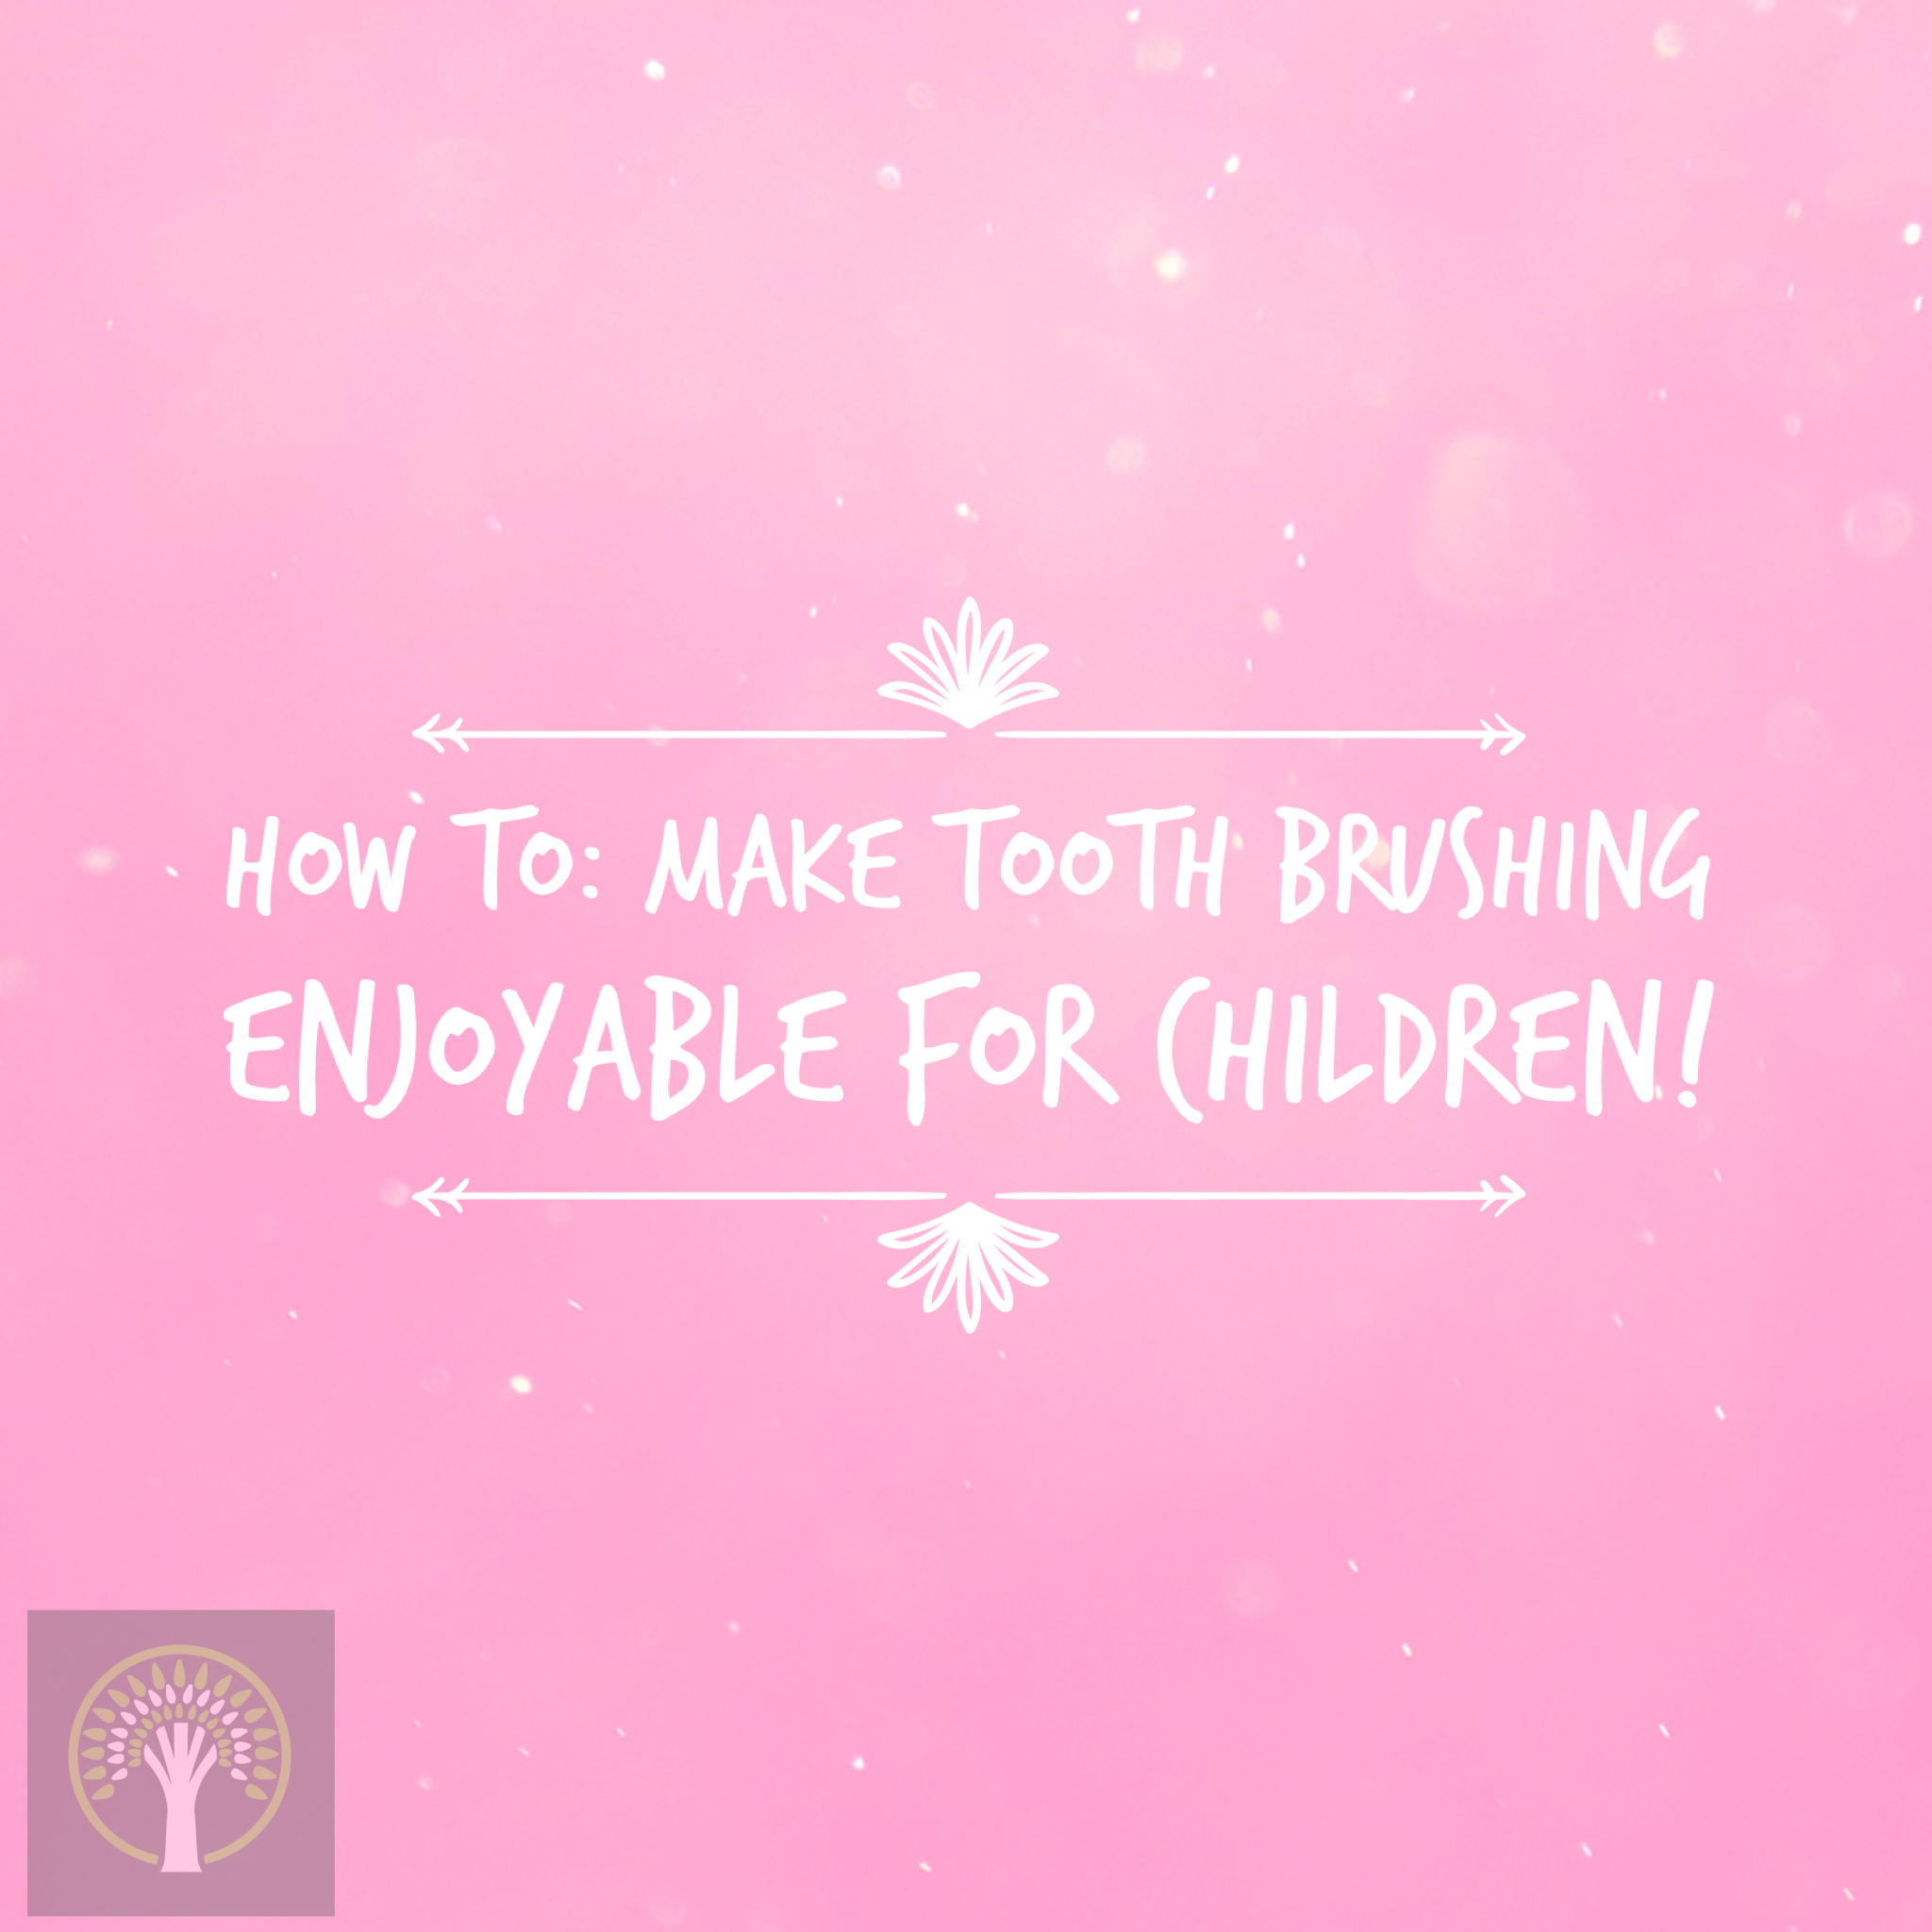 How To: Make Tooth Brushing Enjoyable For Children!